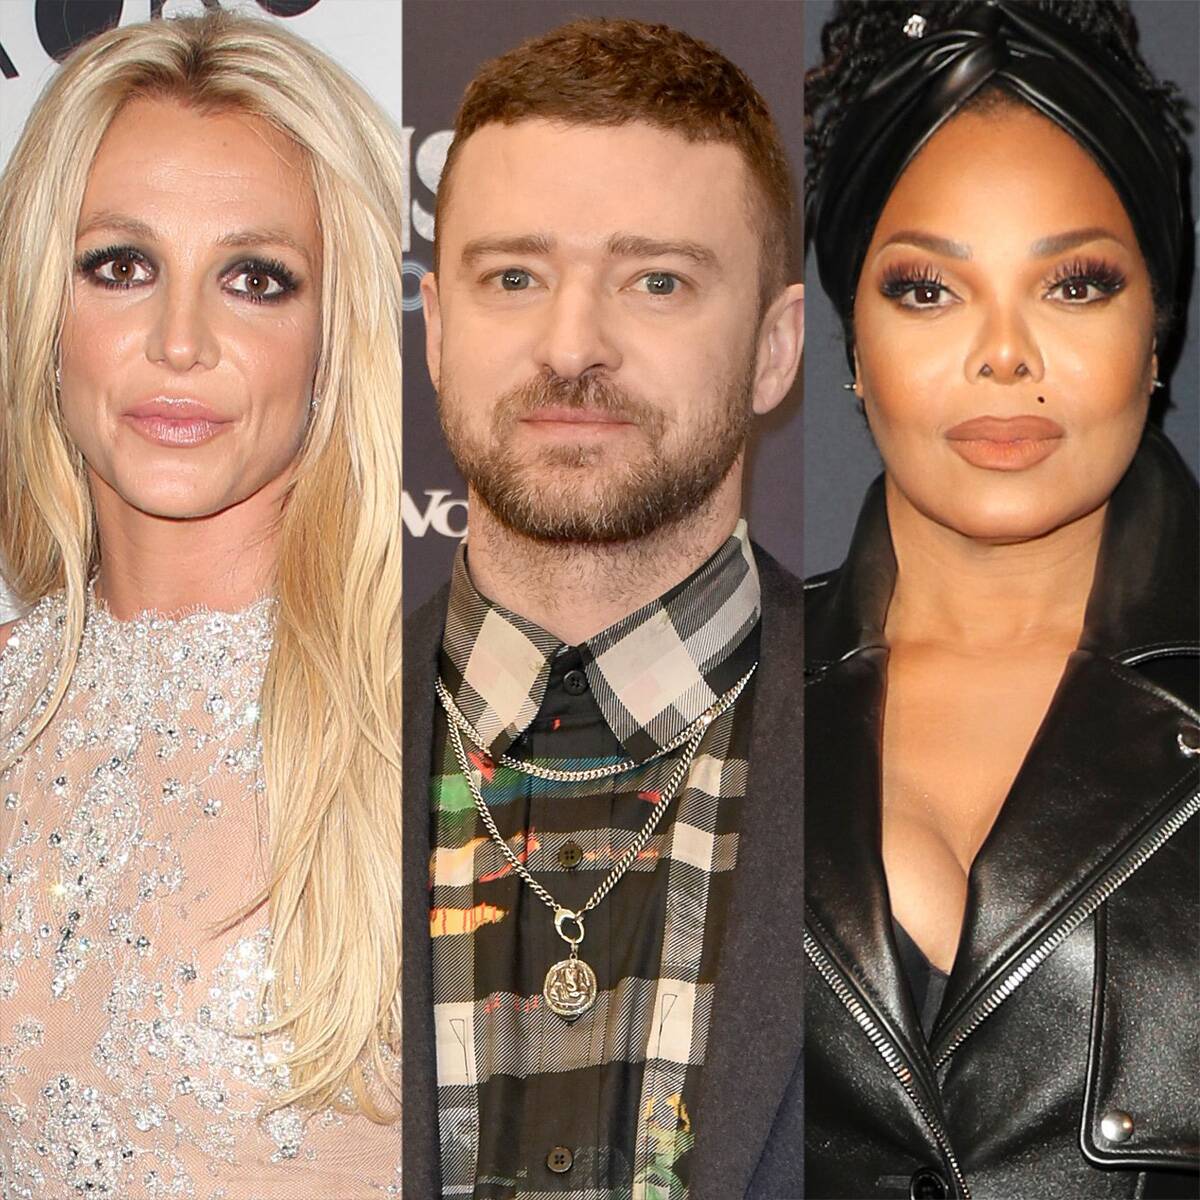 Justin Timberlake Apologizes to Britney Spears and Janet Jackson for His "Ignorance"